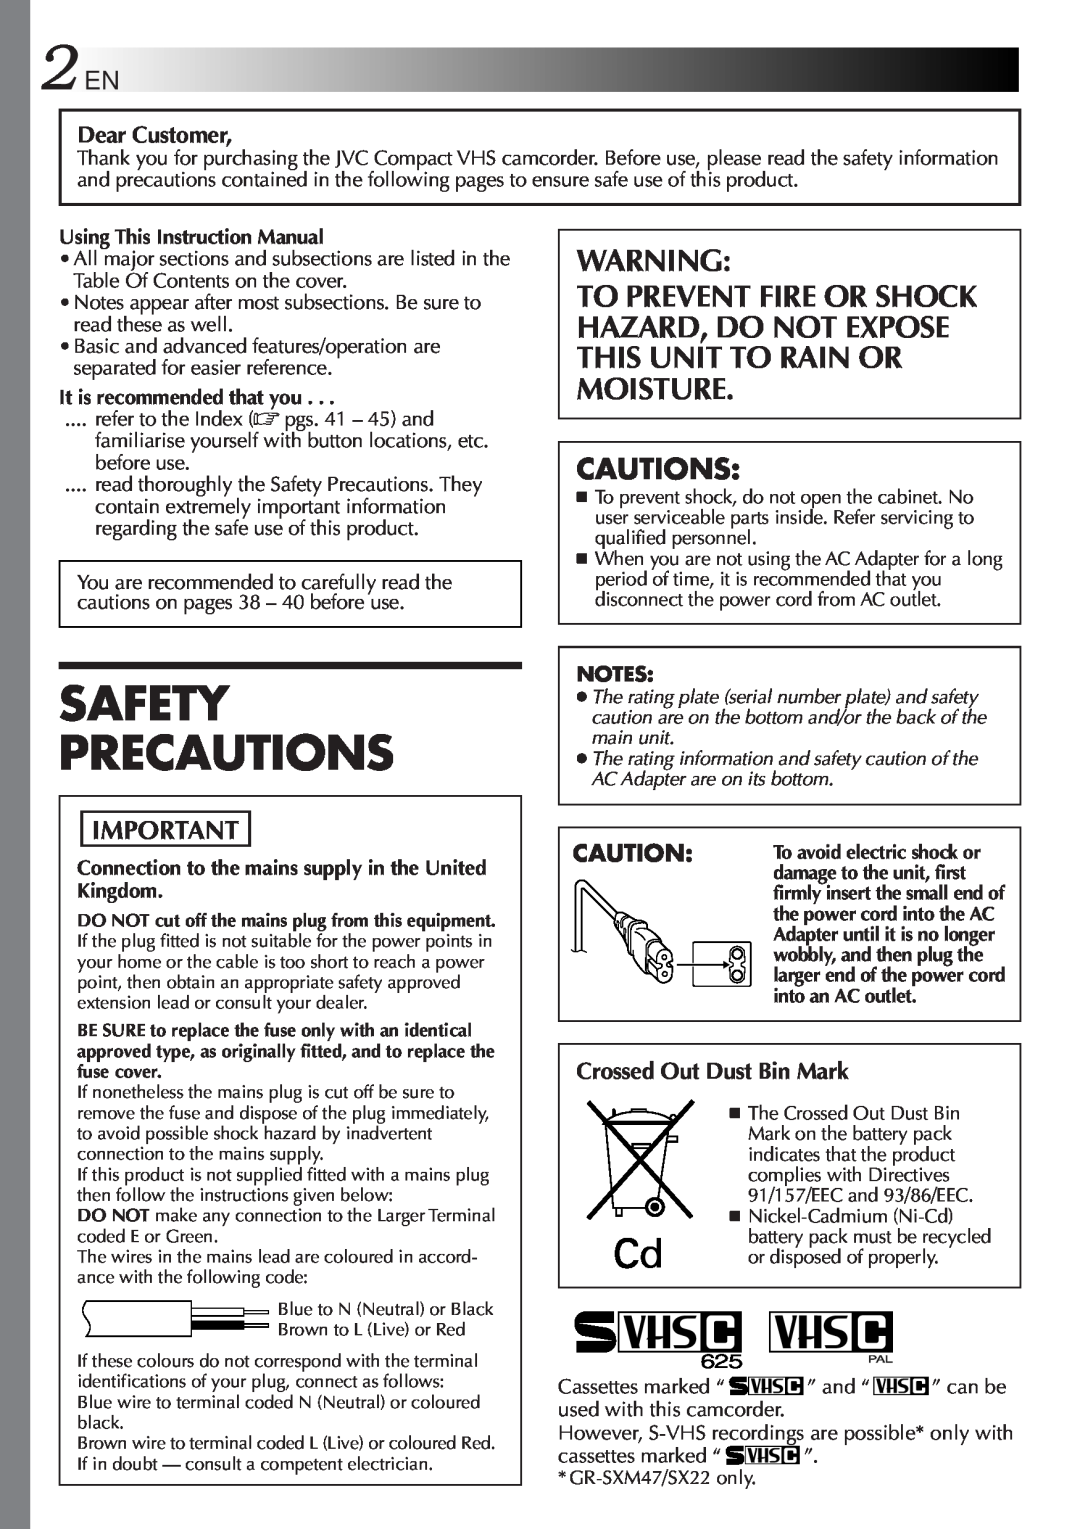 JVC GR-SXM47 Safety Precautions, Cautions, Dear Customer, Crossed Out Dust Bin Mark, Using This Instruction Manual 